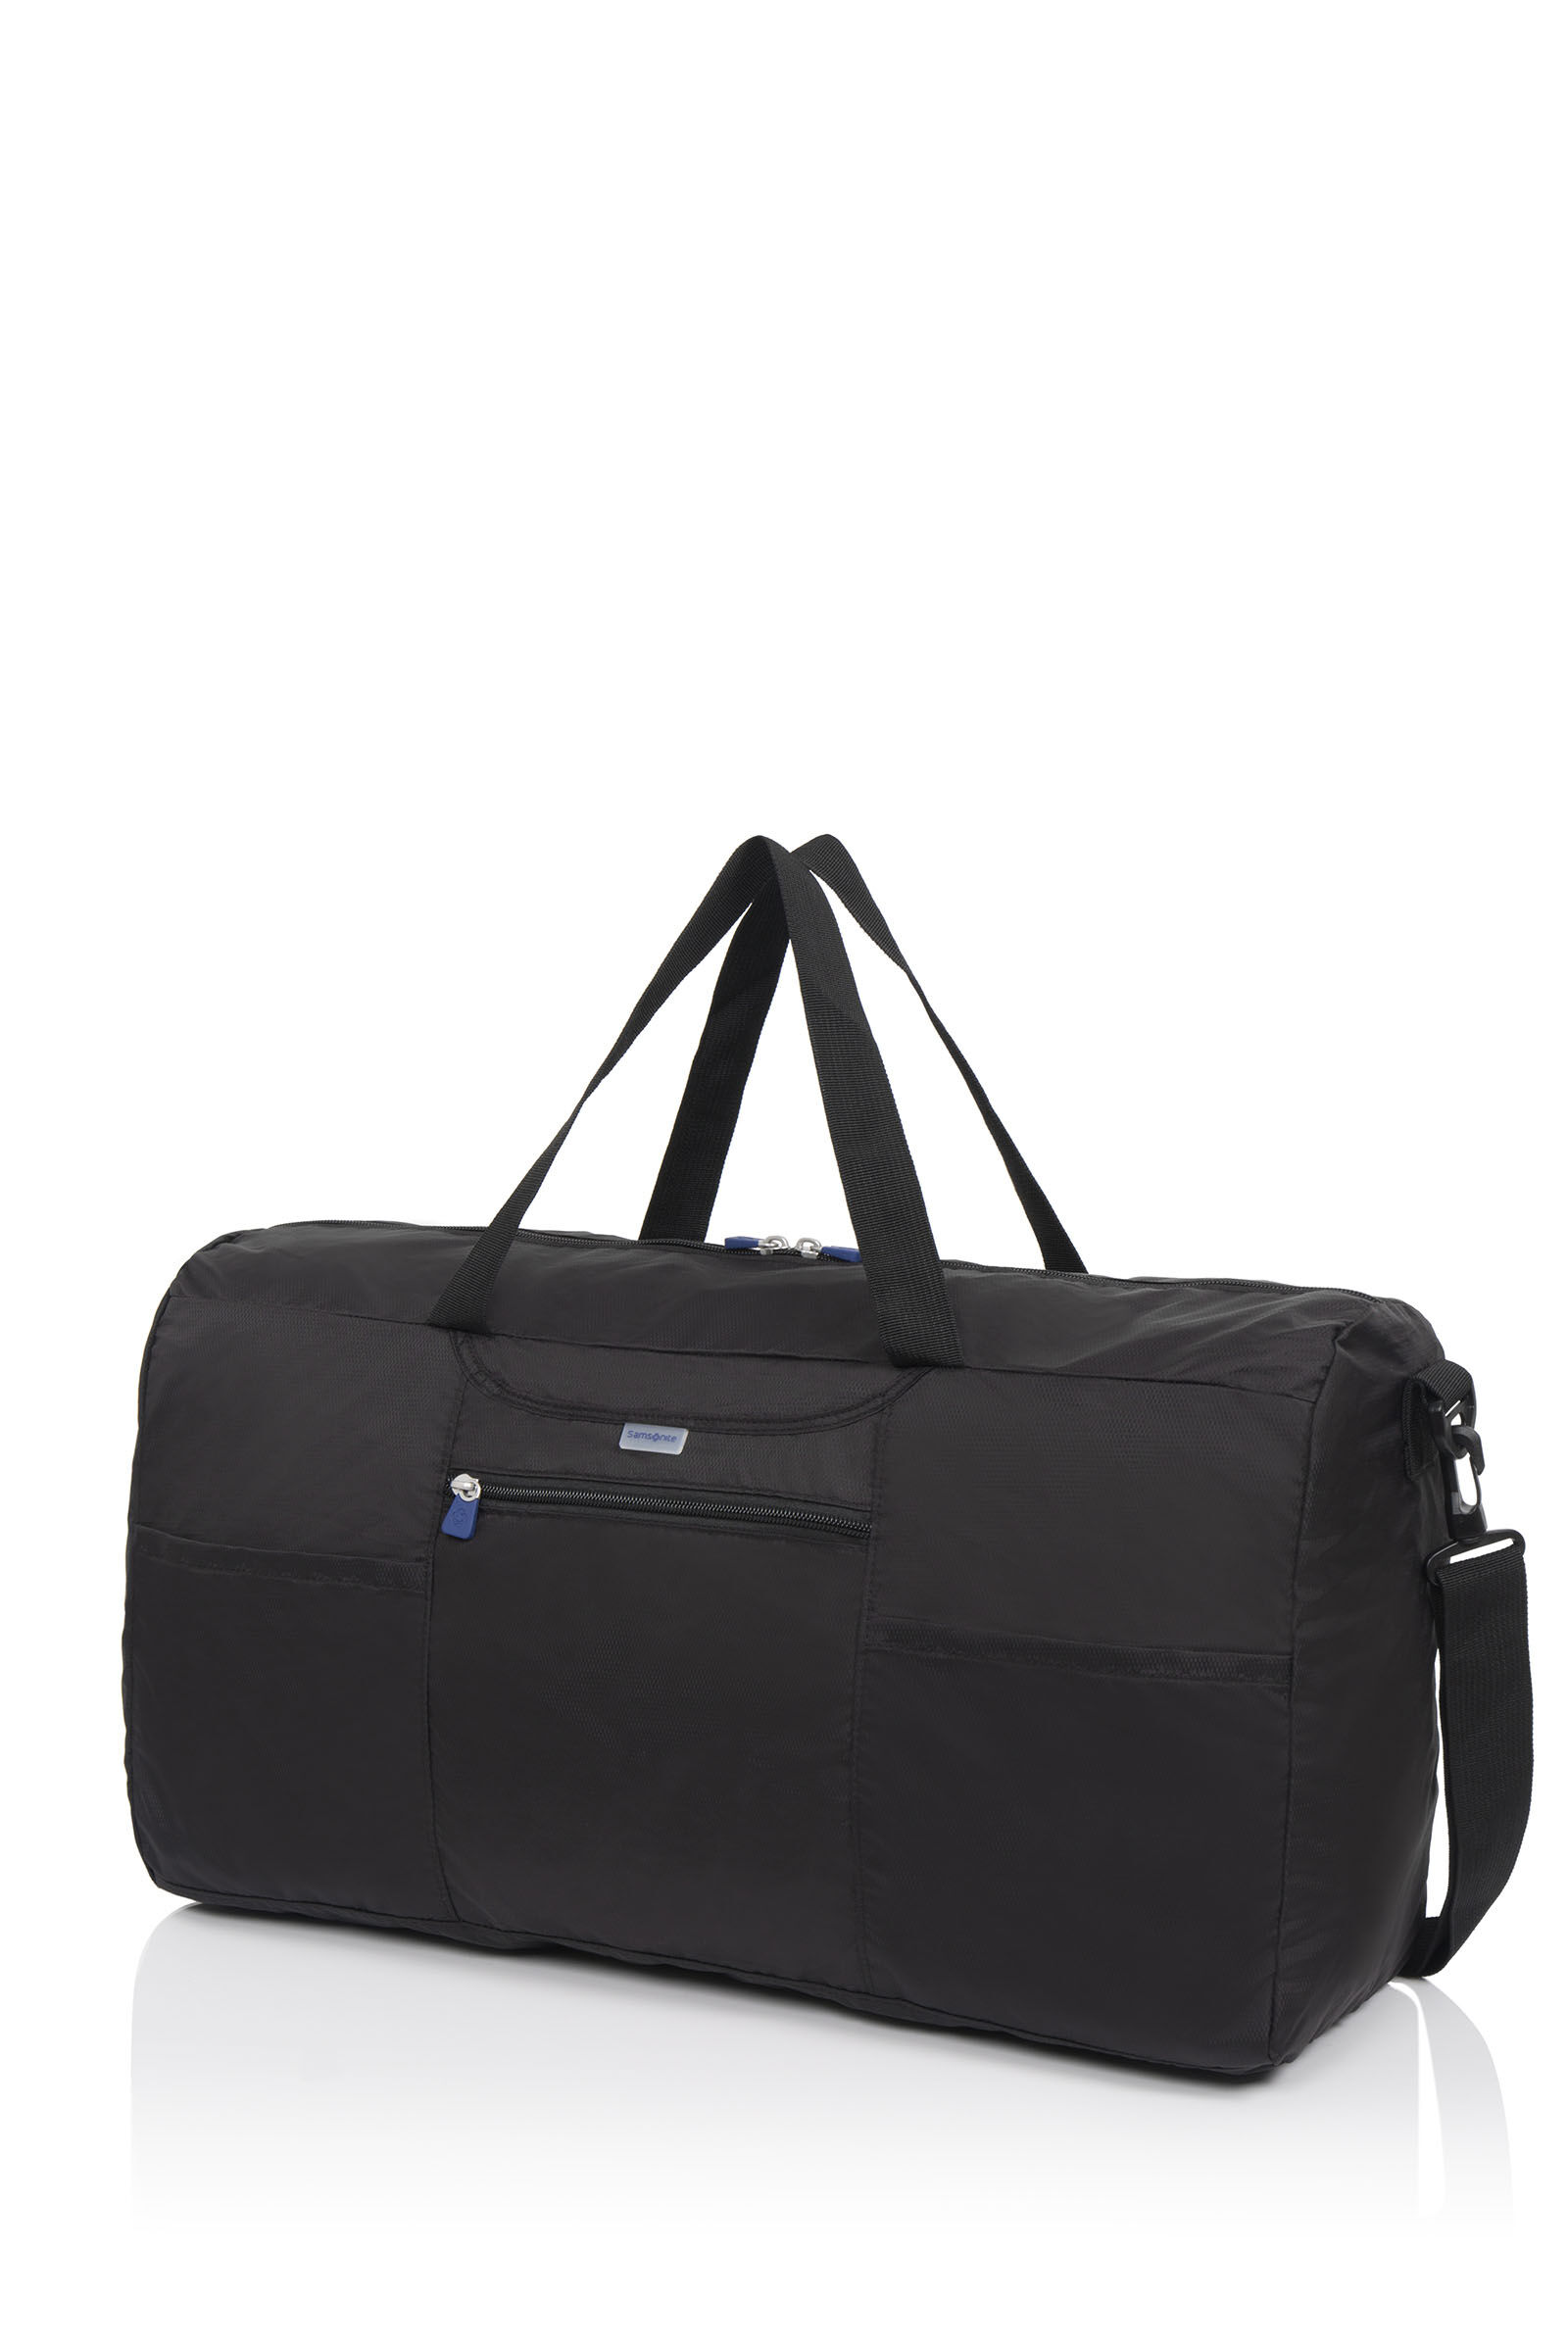 Extra Extra Large Folding Duffle Bag  60 Litre  Black  Travel Blue Travel  Accessories